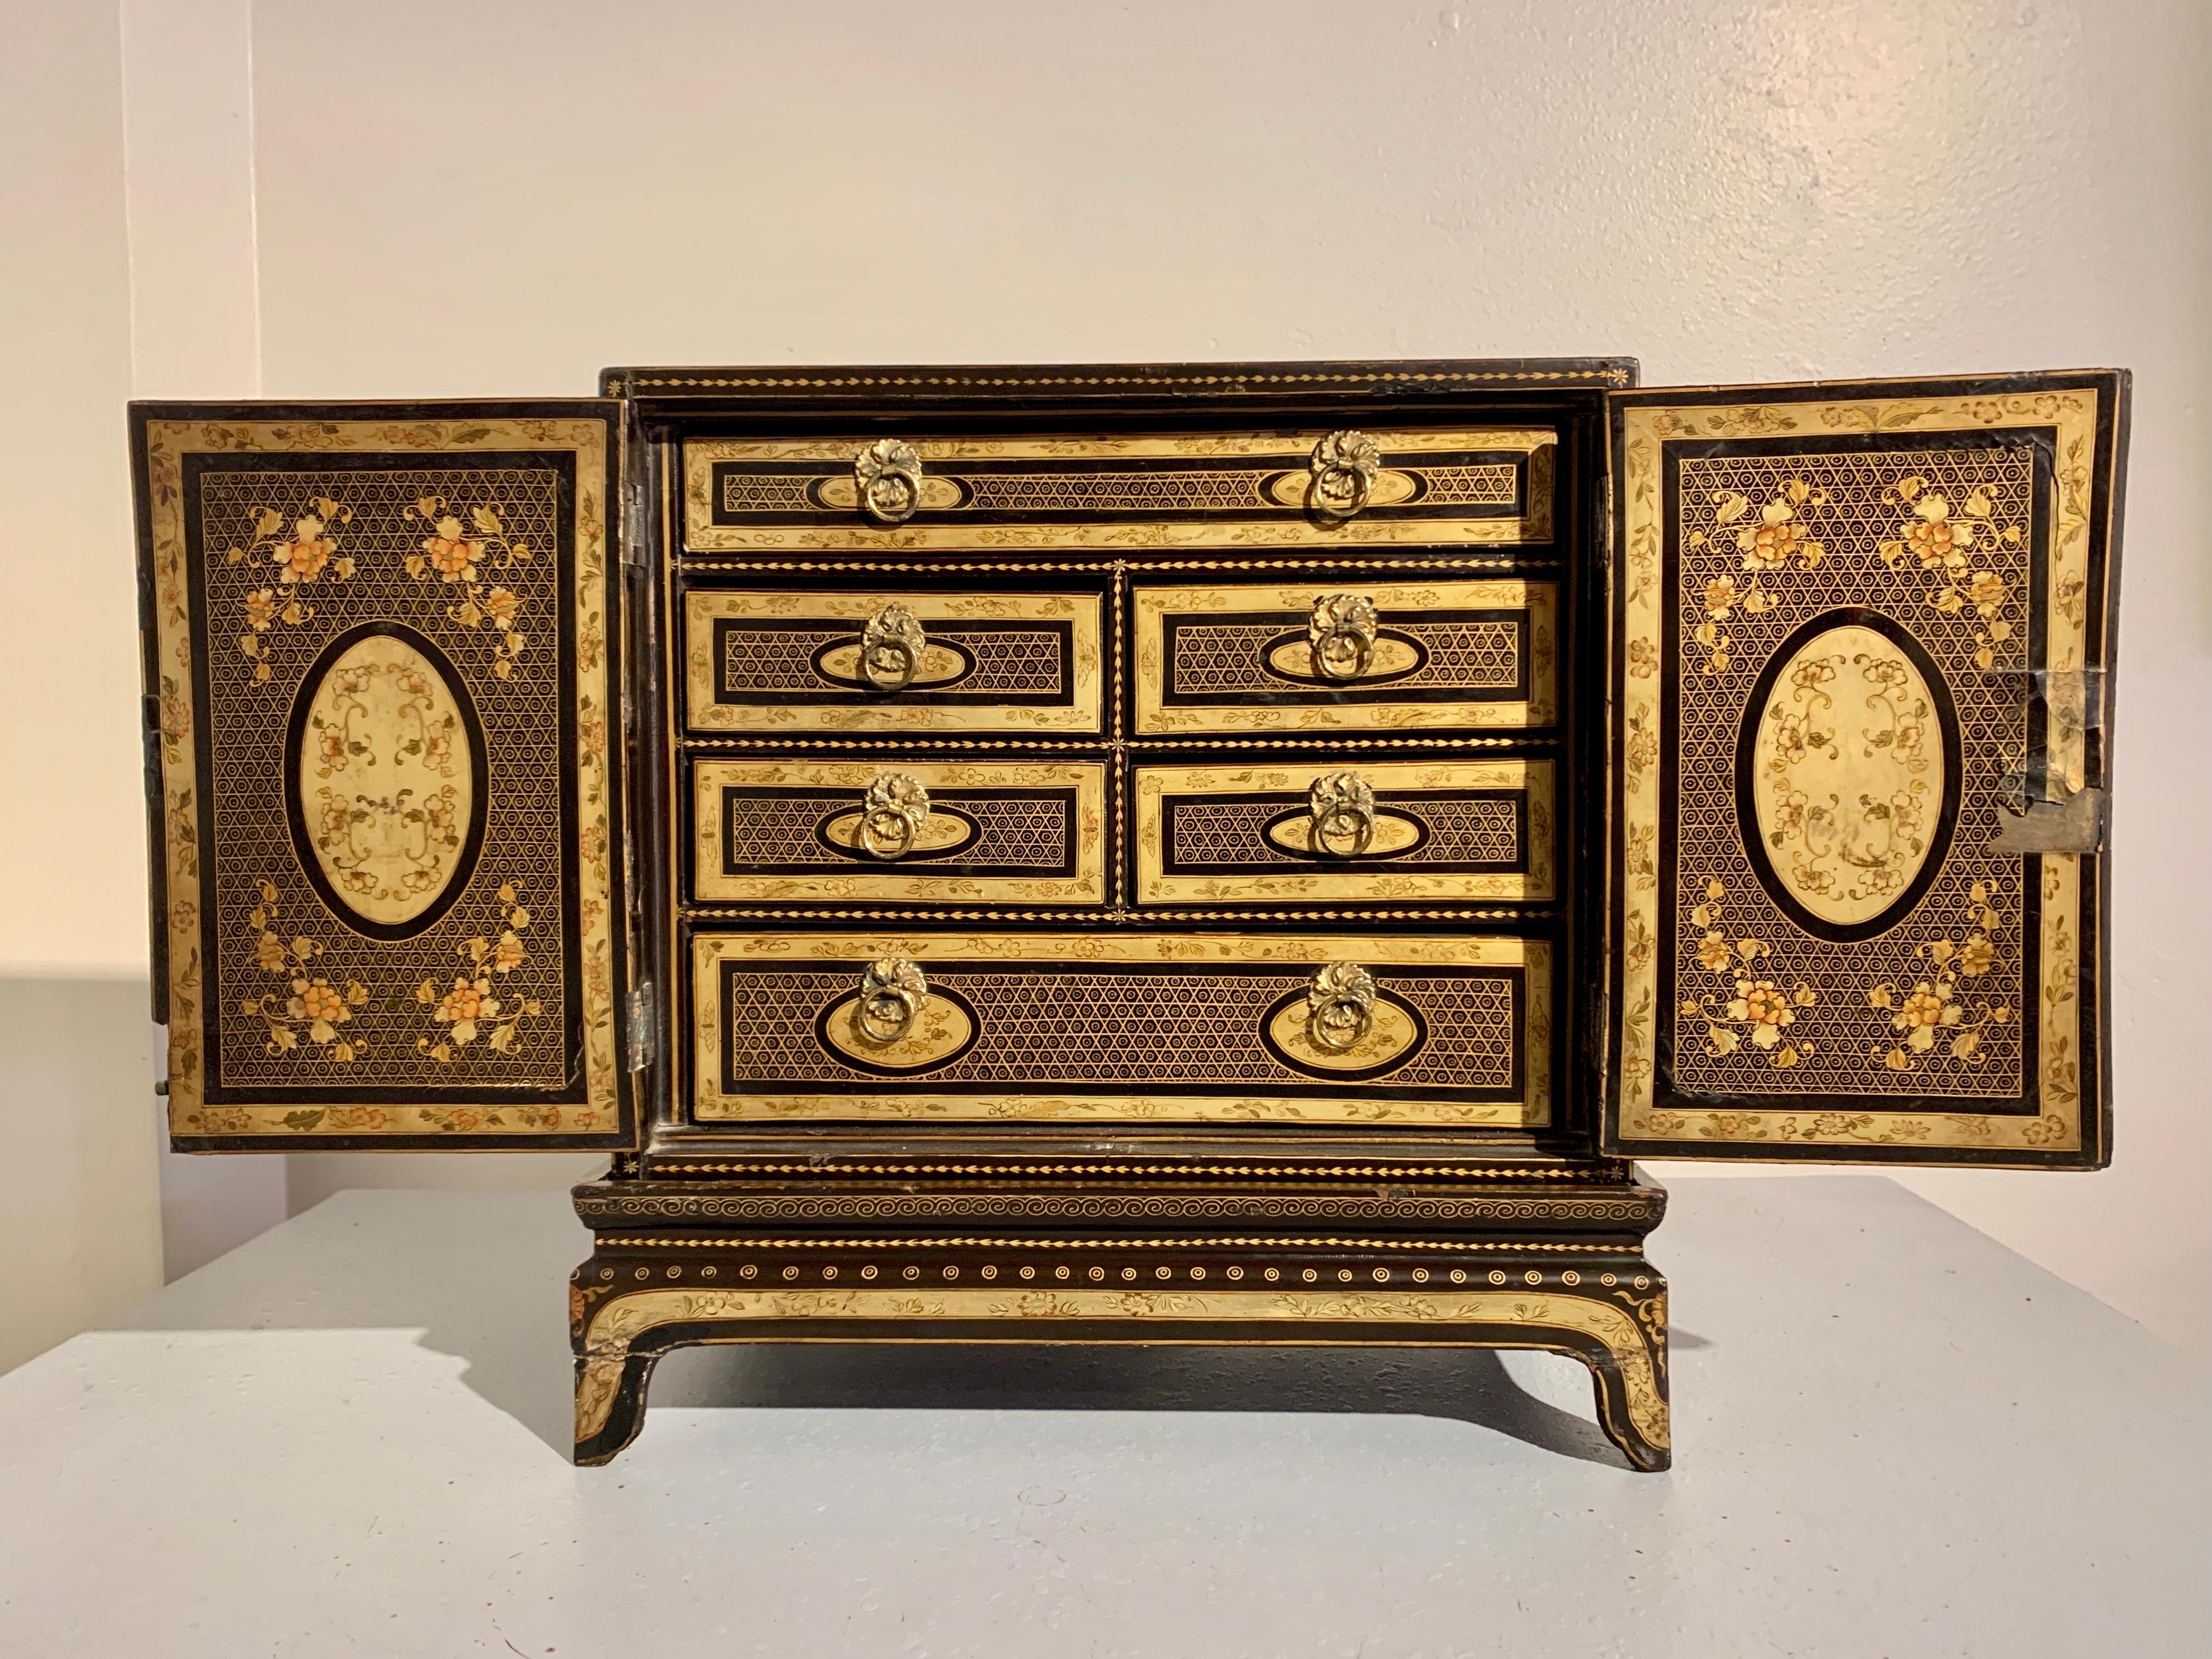 Chinese Export Black Lacquer and Gilt Painted Small Cabinet, Mid 19th Century 3